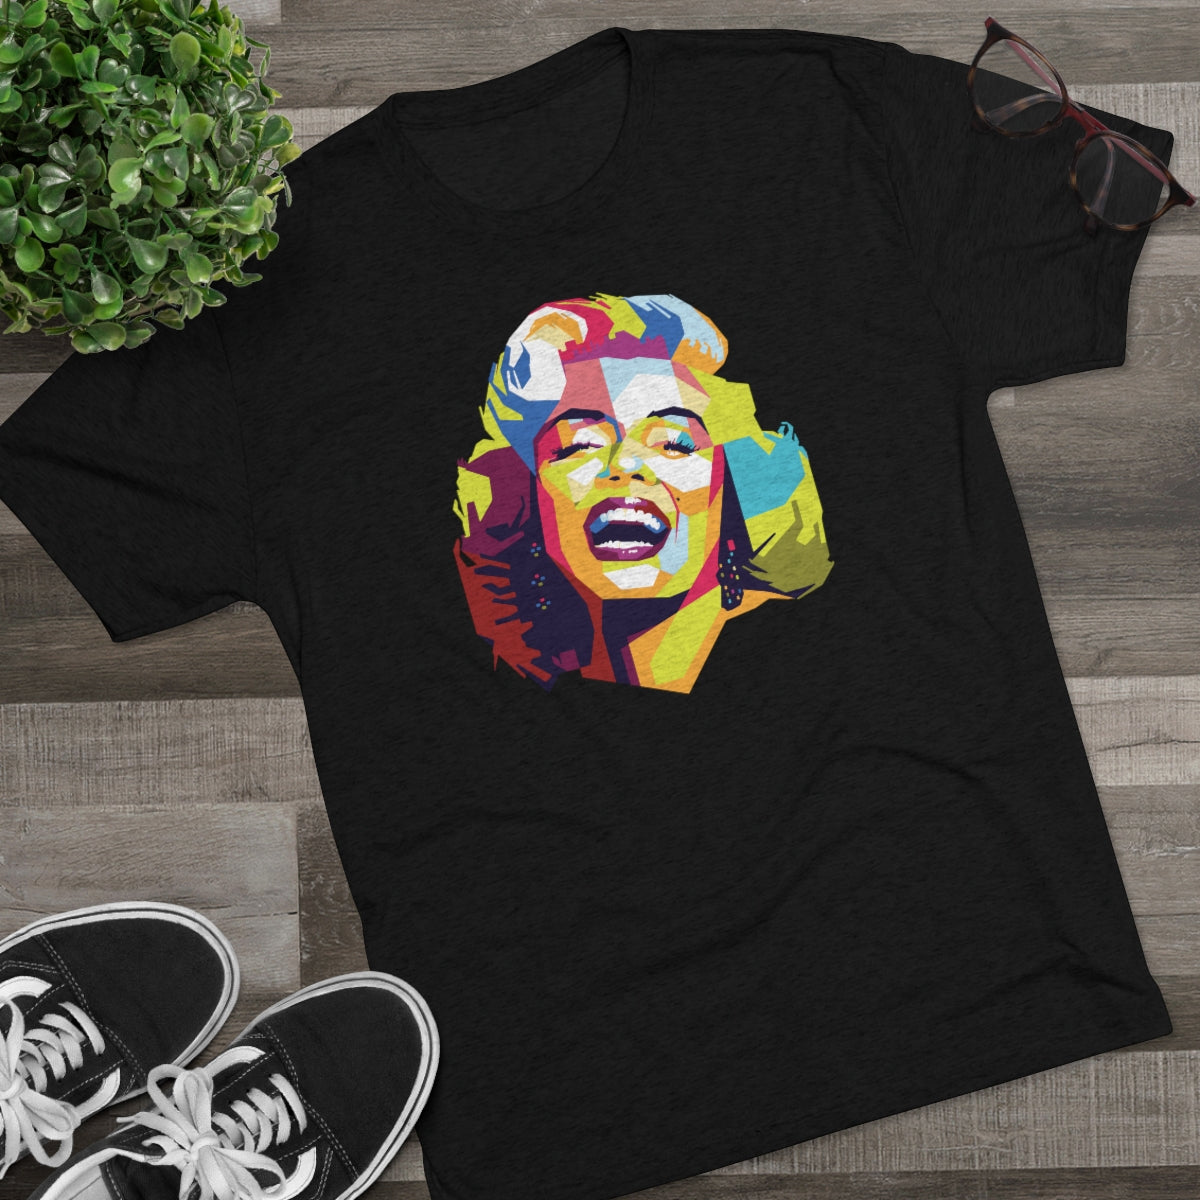 Glam Grin – Limited Edition – Unisex Tri-Blend Crew Tee